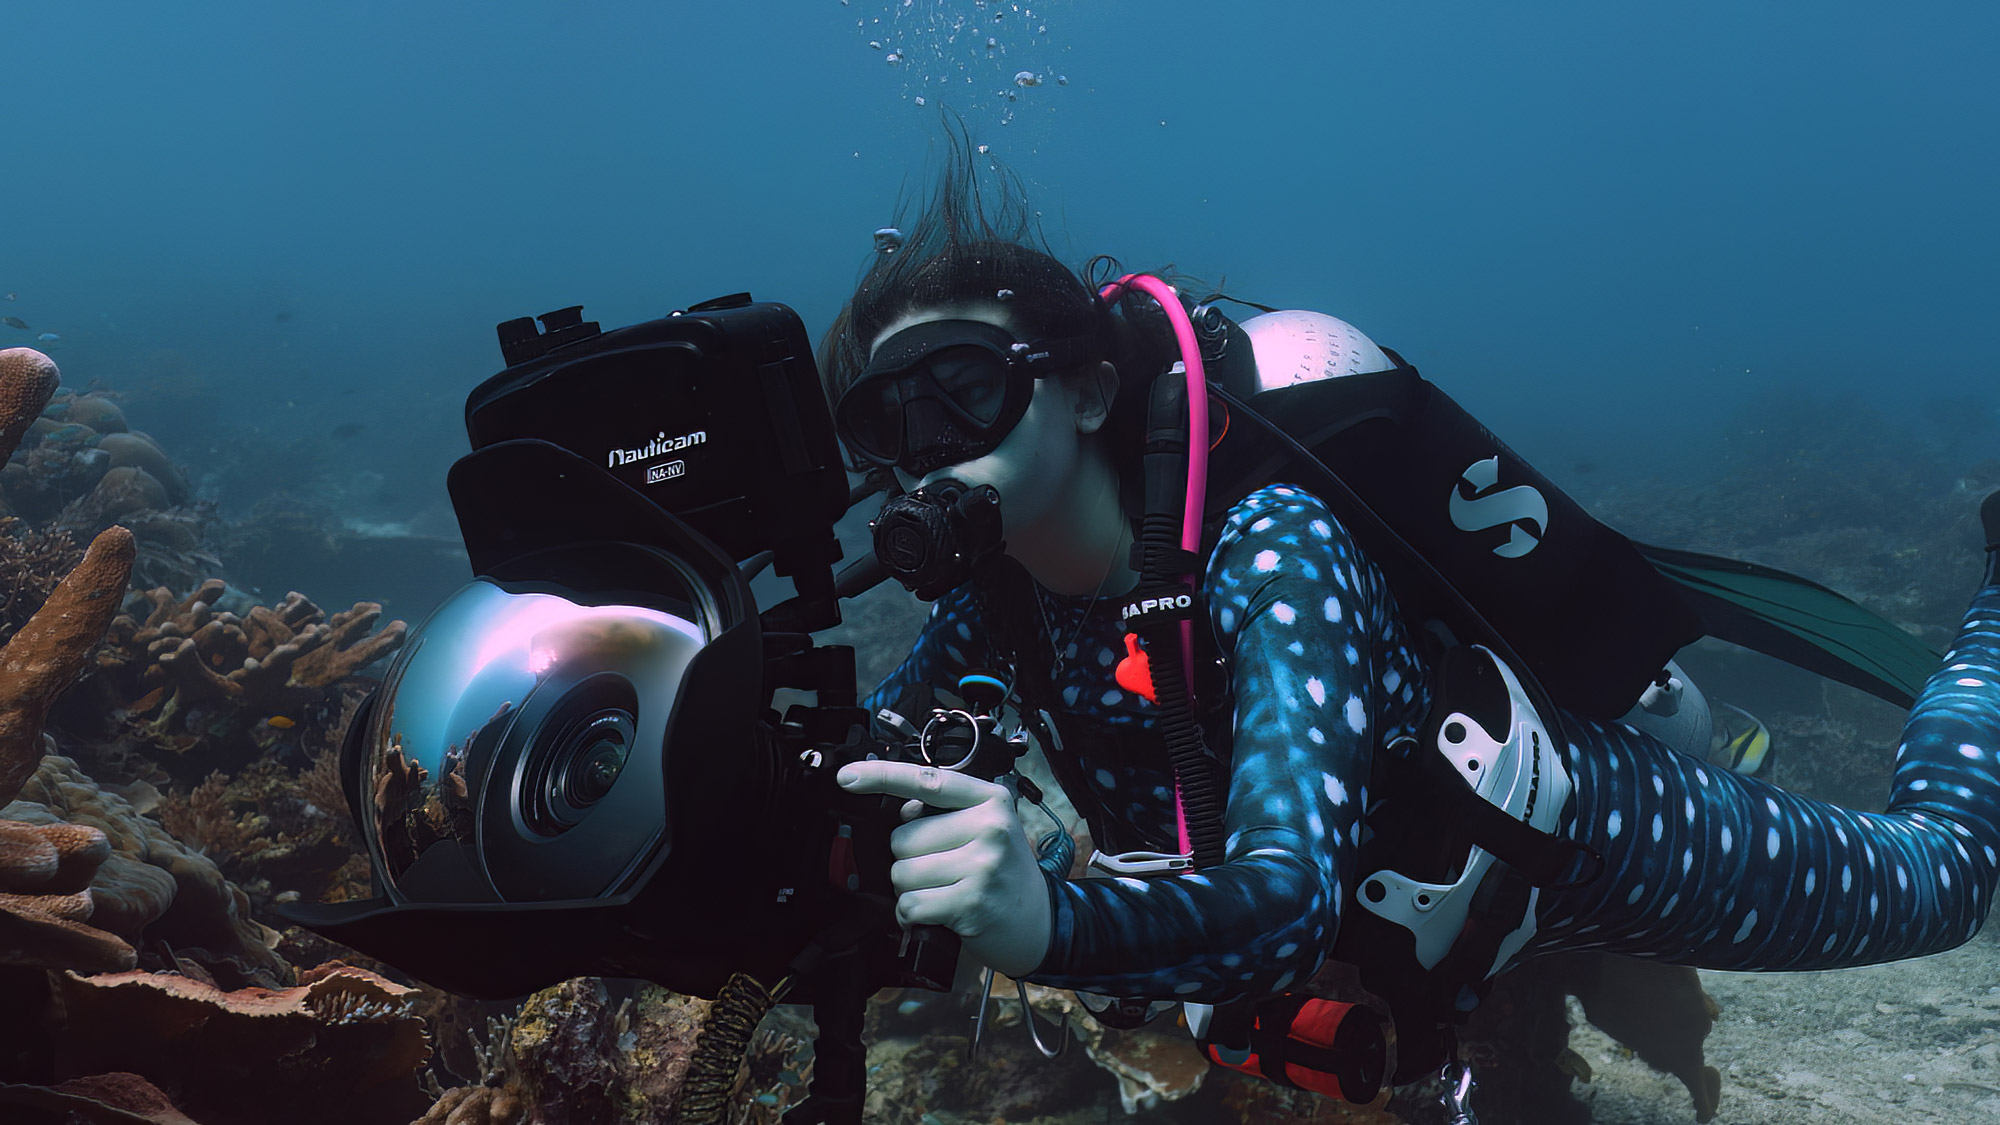 Sony A7S III Review - Underwater Photography Guide